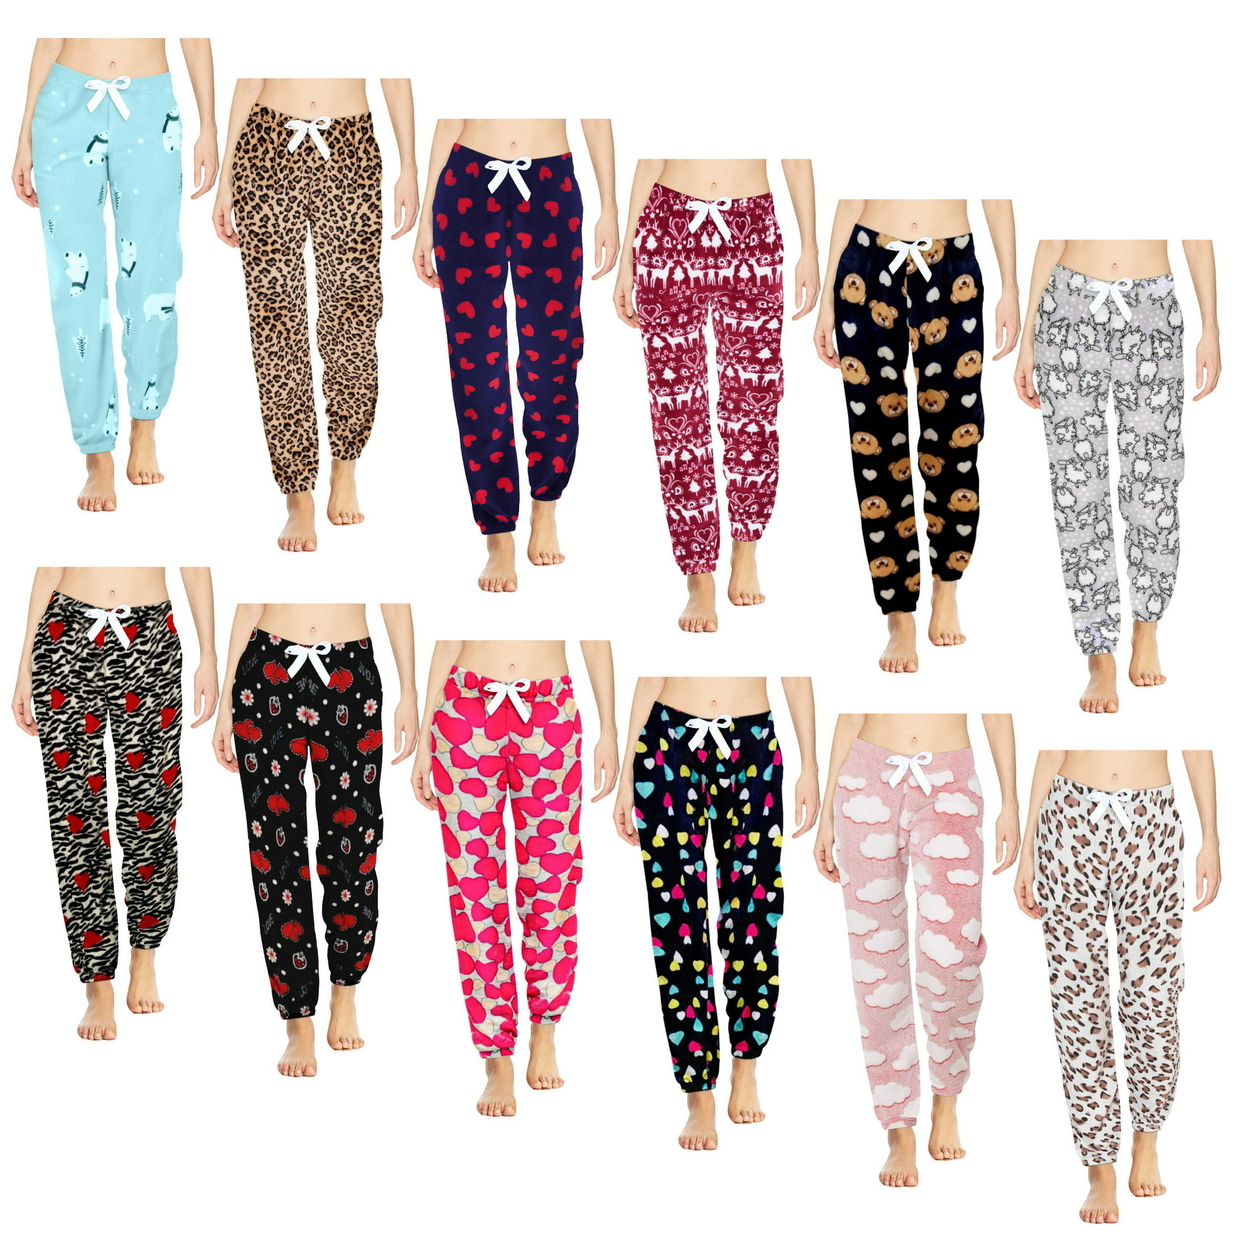 Multi-Pack: Women's Printed Ultra-Soft Comfy Stretch Micro-Fleece Pajama Lounge Pants - 3-pack, Animal, Small